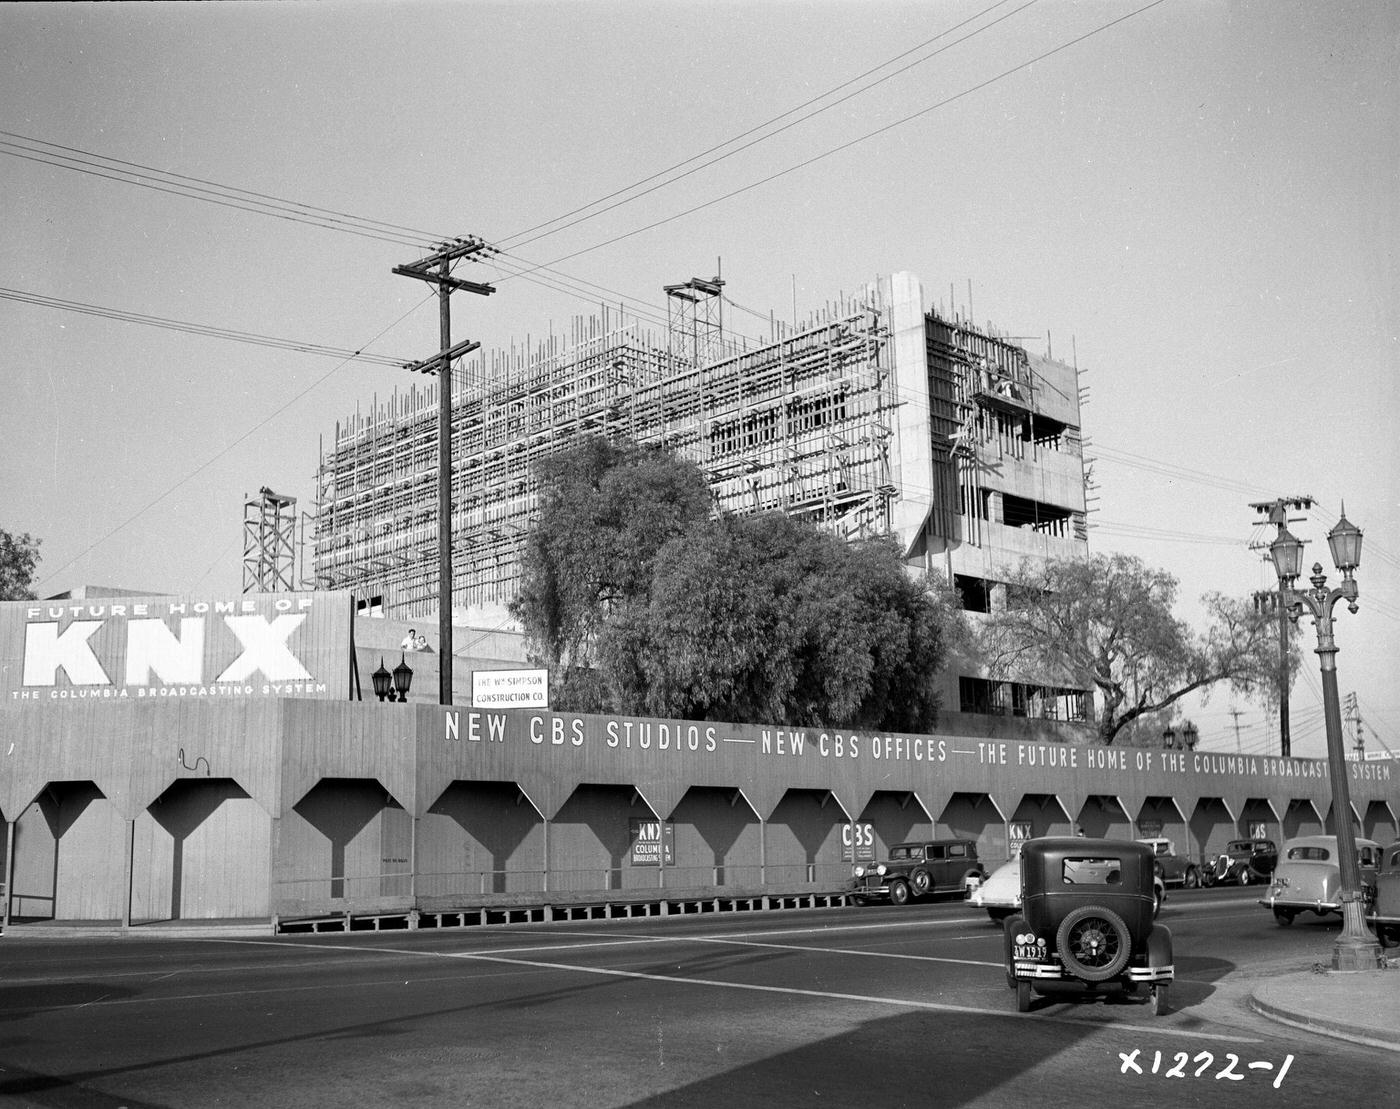 View of unfinished CBS Columbia Square KNX Art Deco style building, looking northwest from Gower Street, Los Angeles, 1938